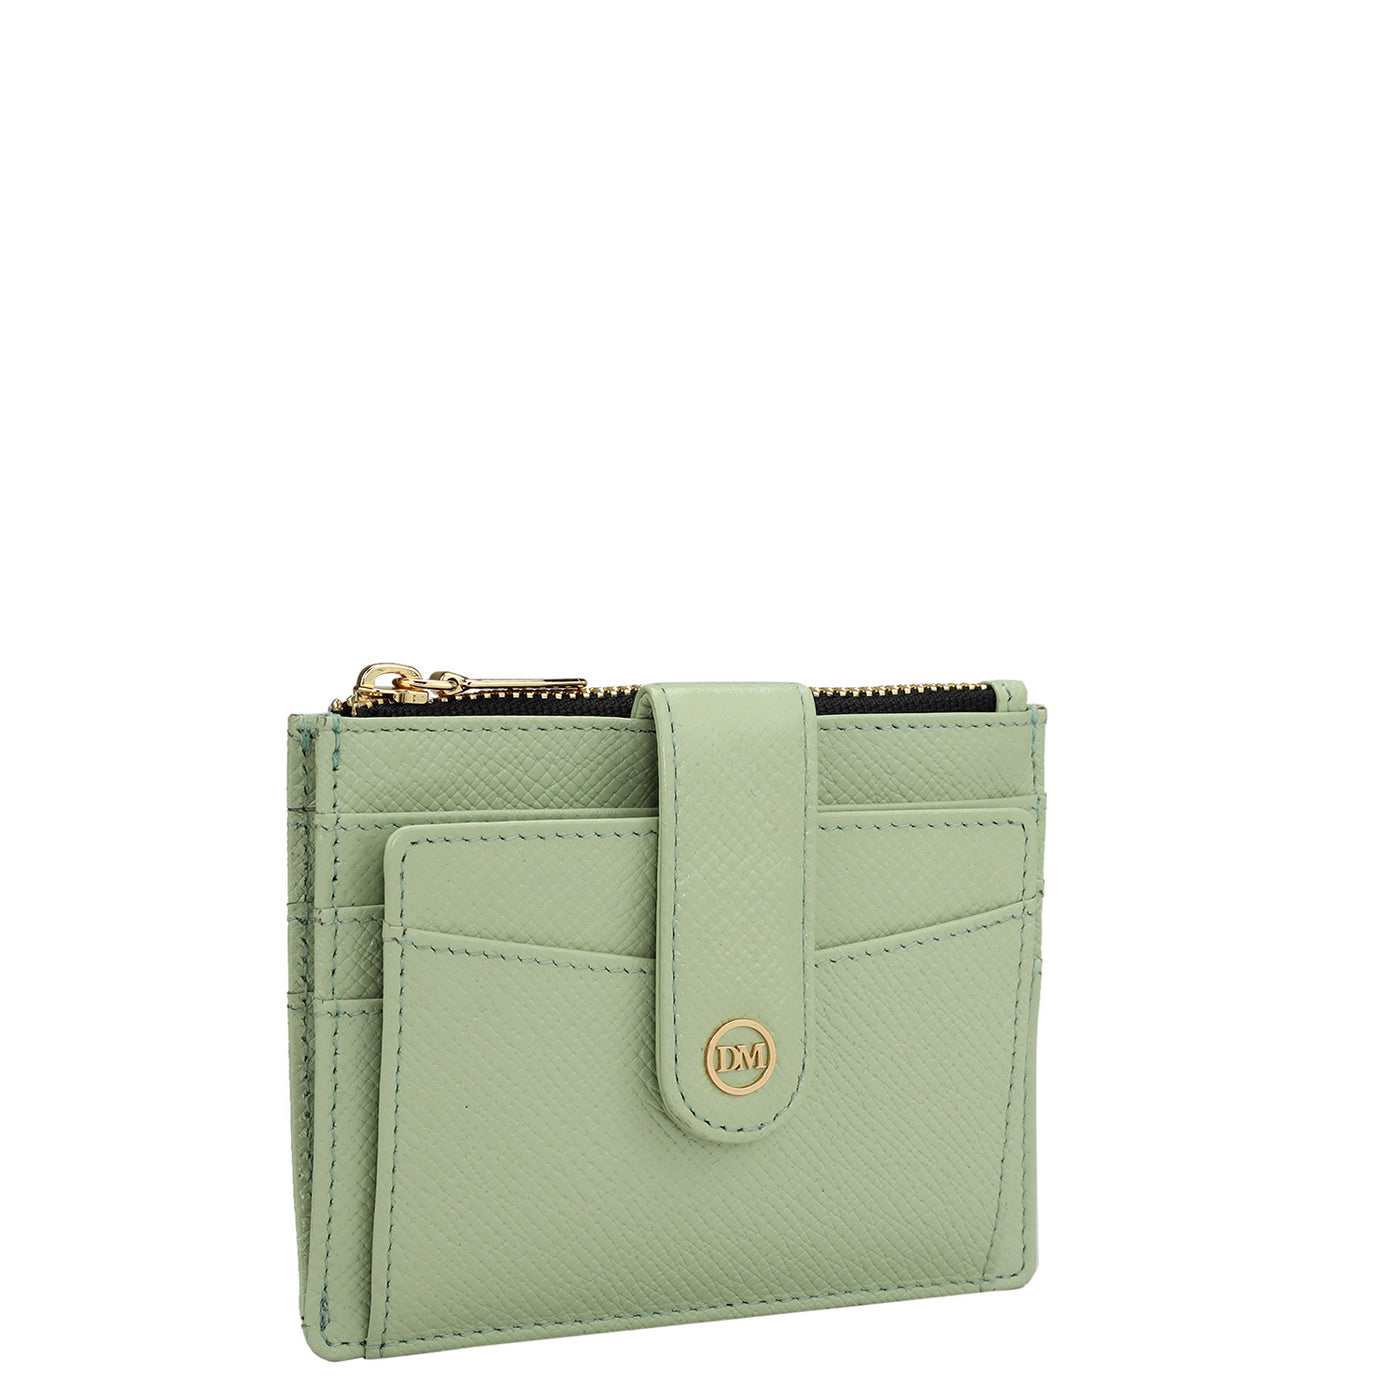 Franzy Leather Card Case - Mint